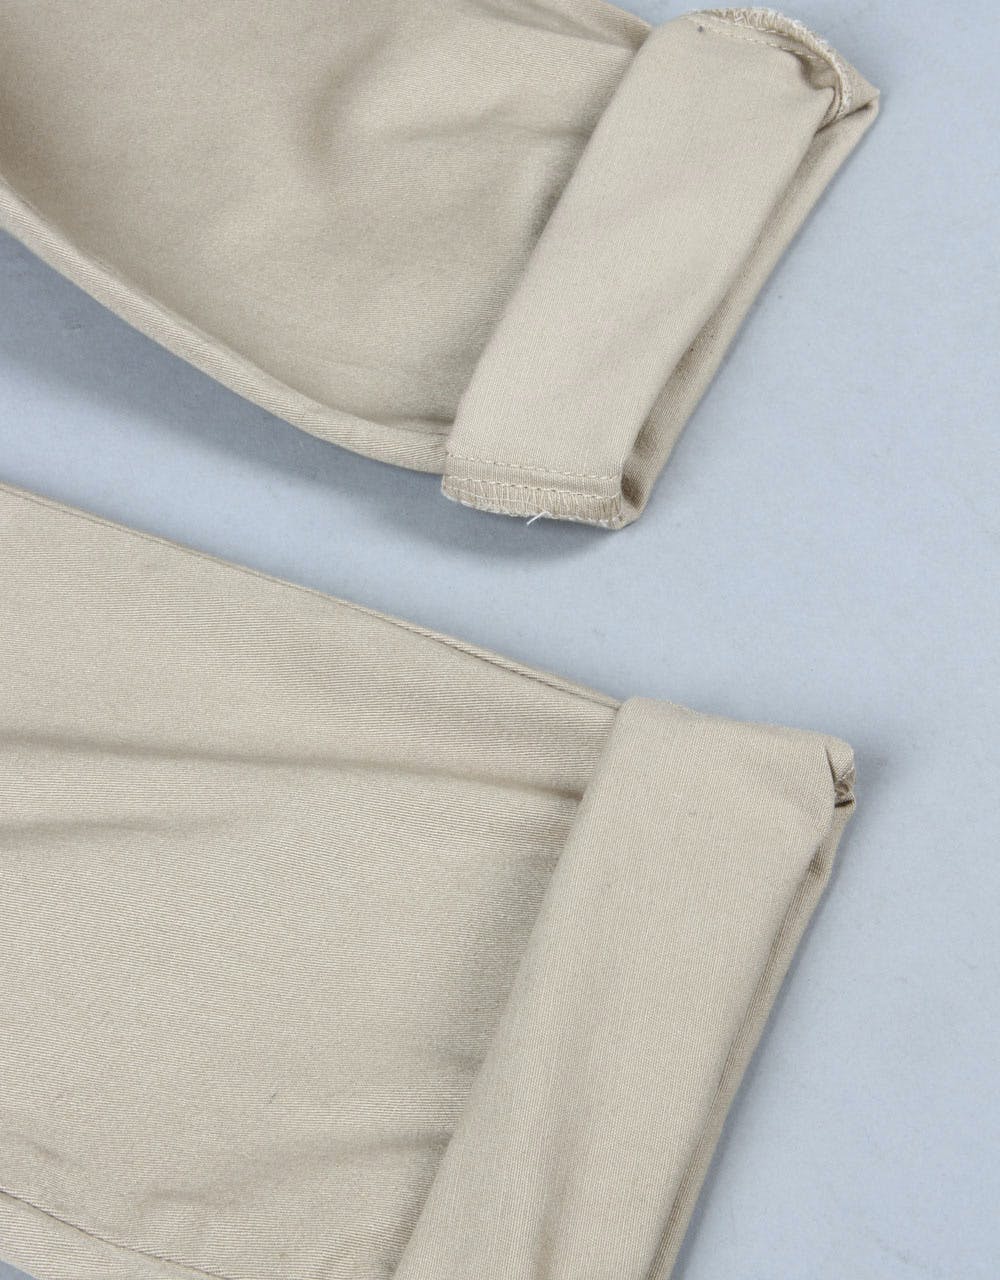 Route One Slim Fit Chinos - Khaki